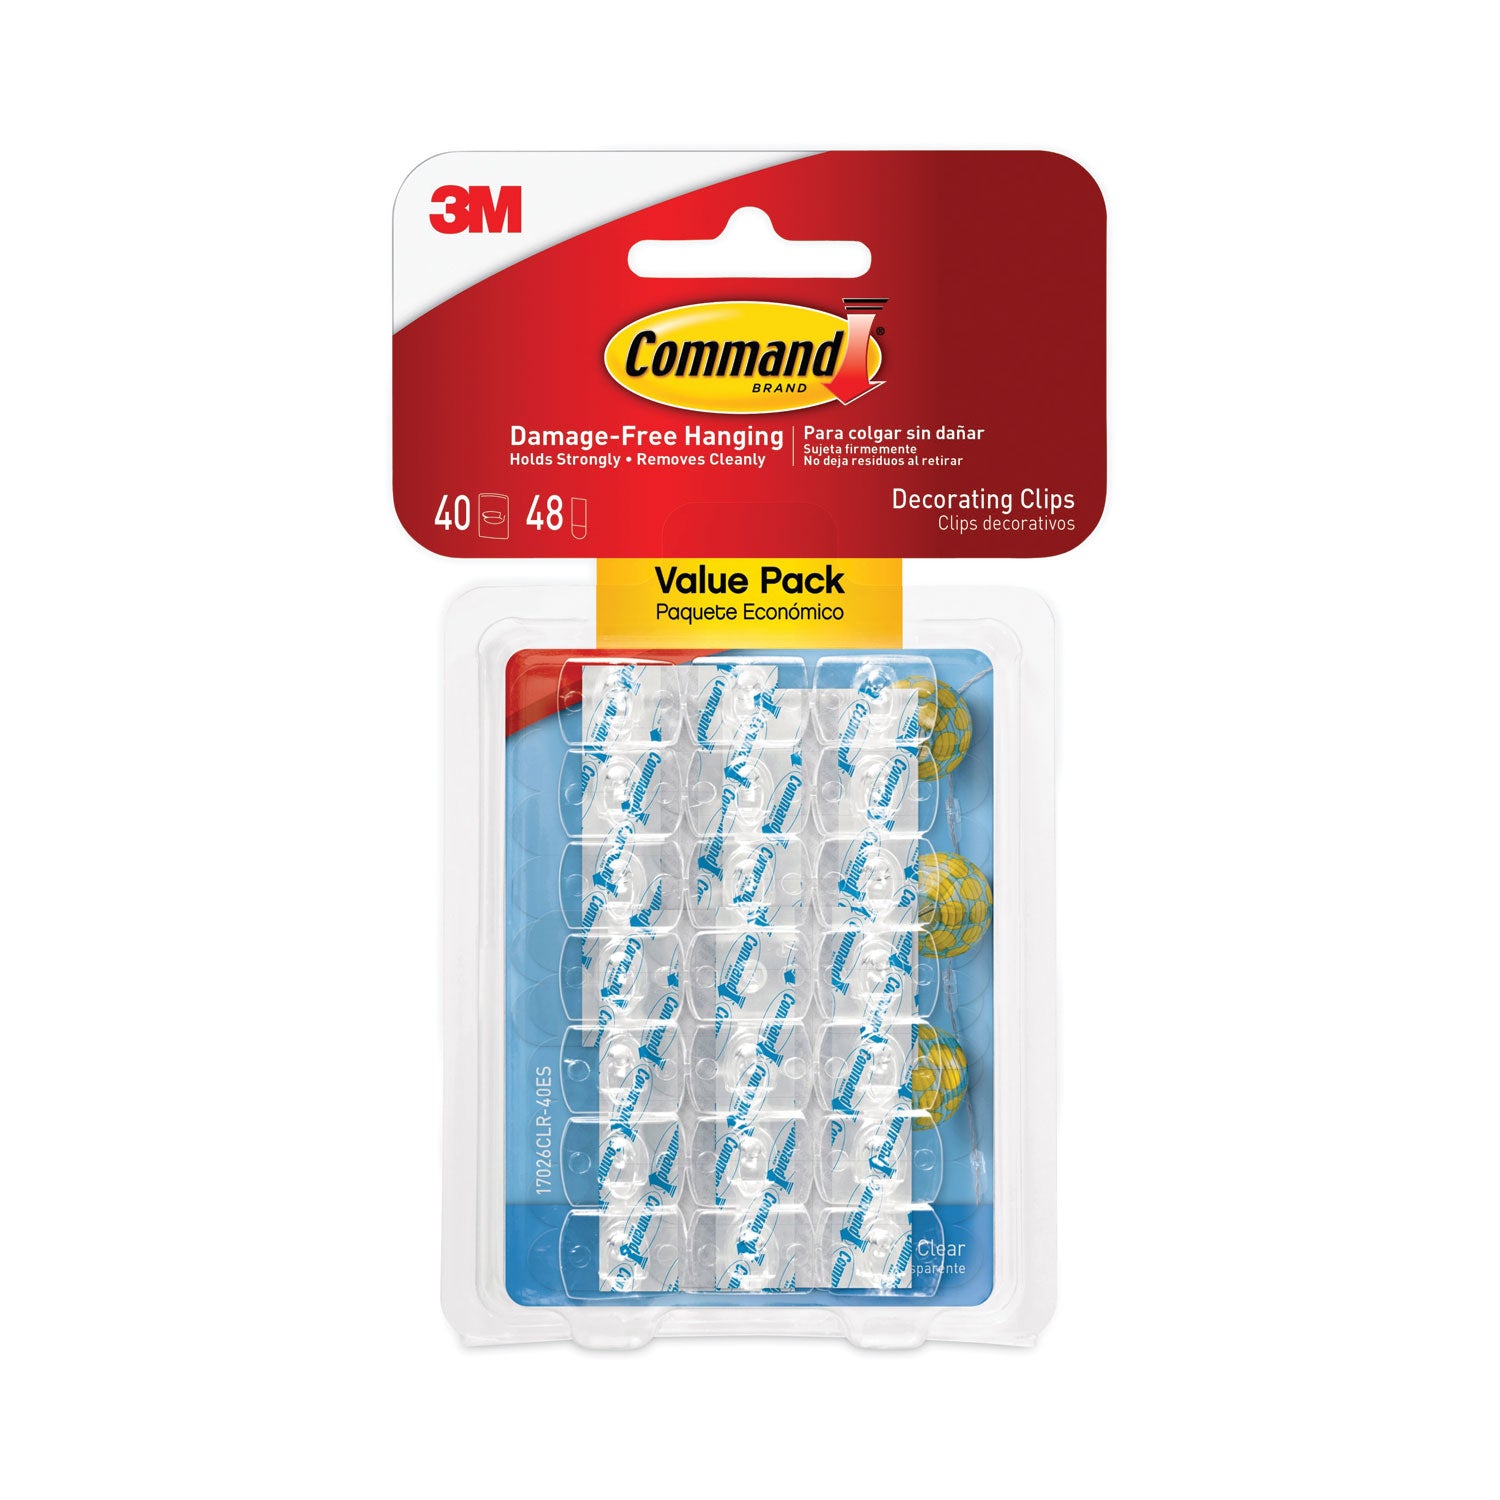 clear-hooks-and-strips-decorating-clips-plastic-015-lb-capacity-40-clips-and-48-strips-pack_mmm17026clr40es - 1